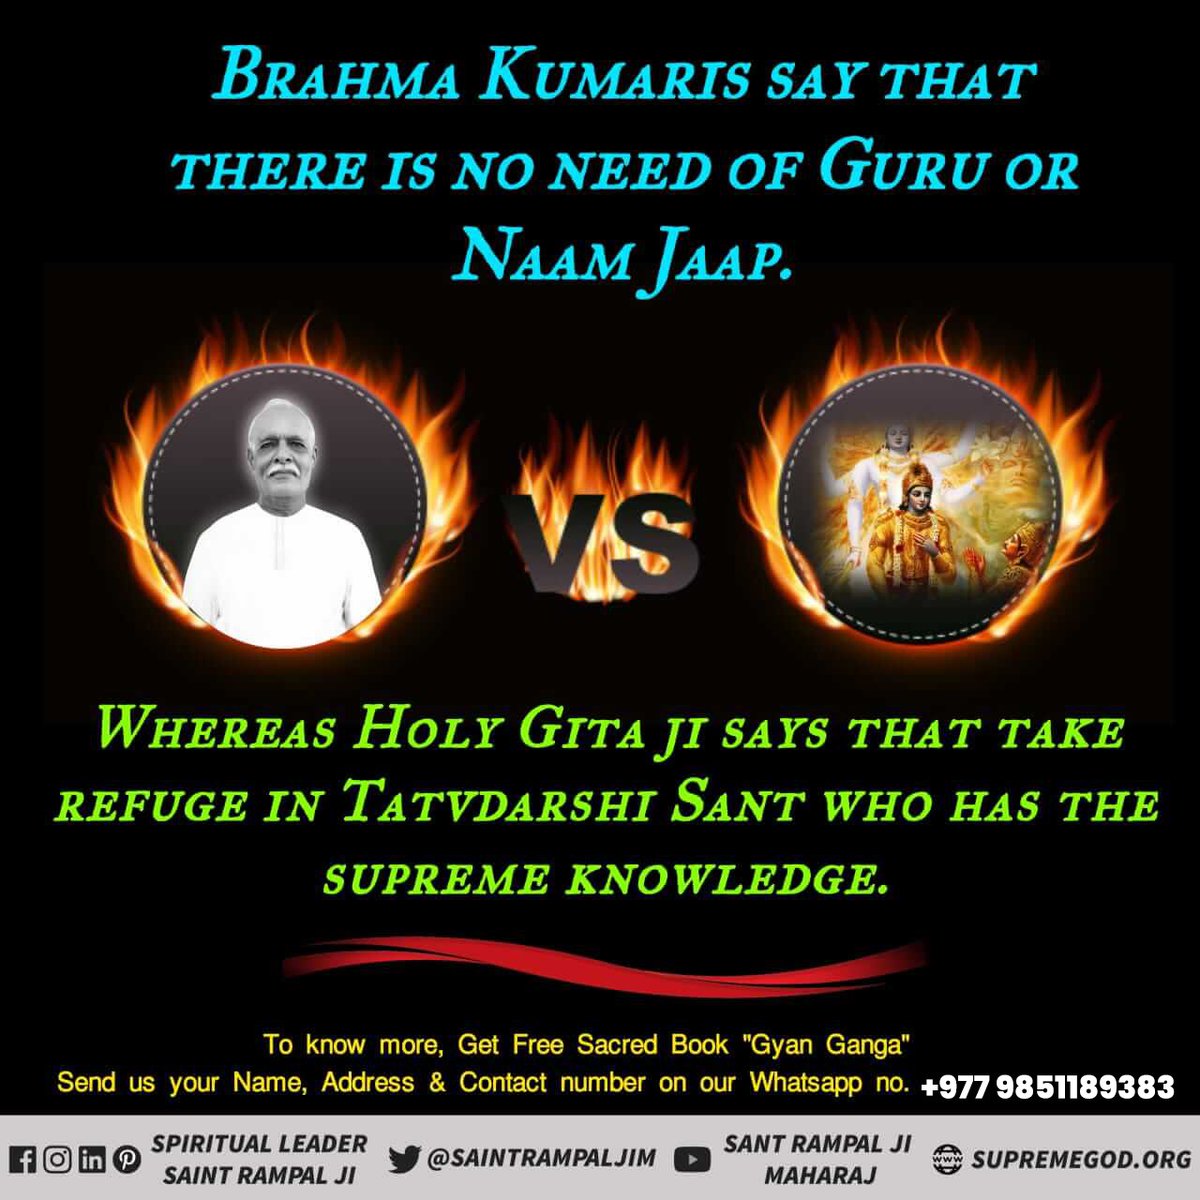 #Reality_Of_BrahmaKumari_Panth The true path to salvation is illuminated by Saint Rampal Ji Maharaj 's teachings, grounded in the essence of all religious scriptures.